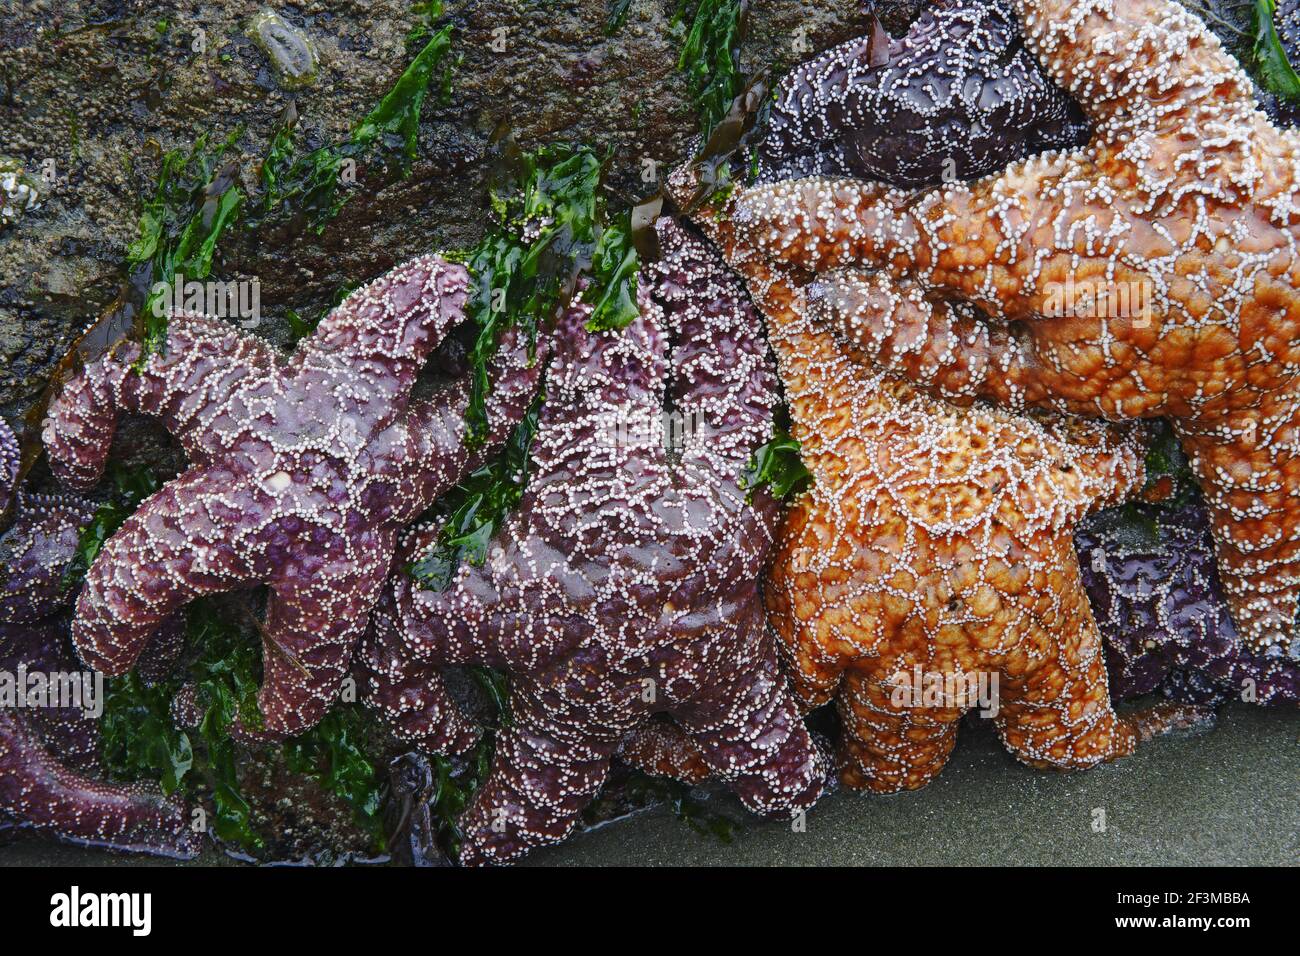 Ochre Sea Star exposed at low tide(Pisaster ochraceus) Olympic National Park Washington State, USA IN000099 Stock Photo